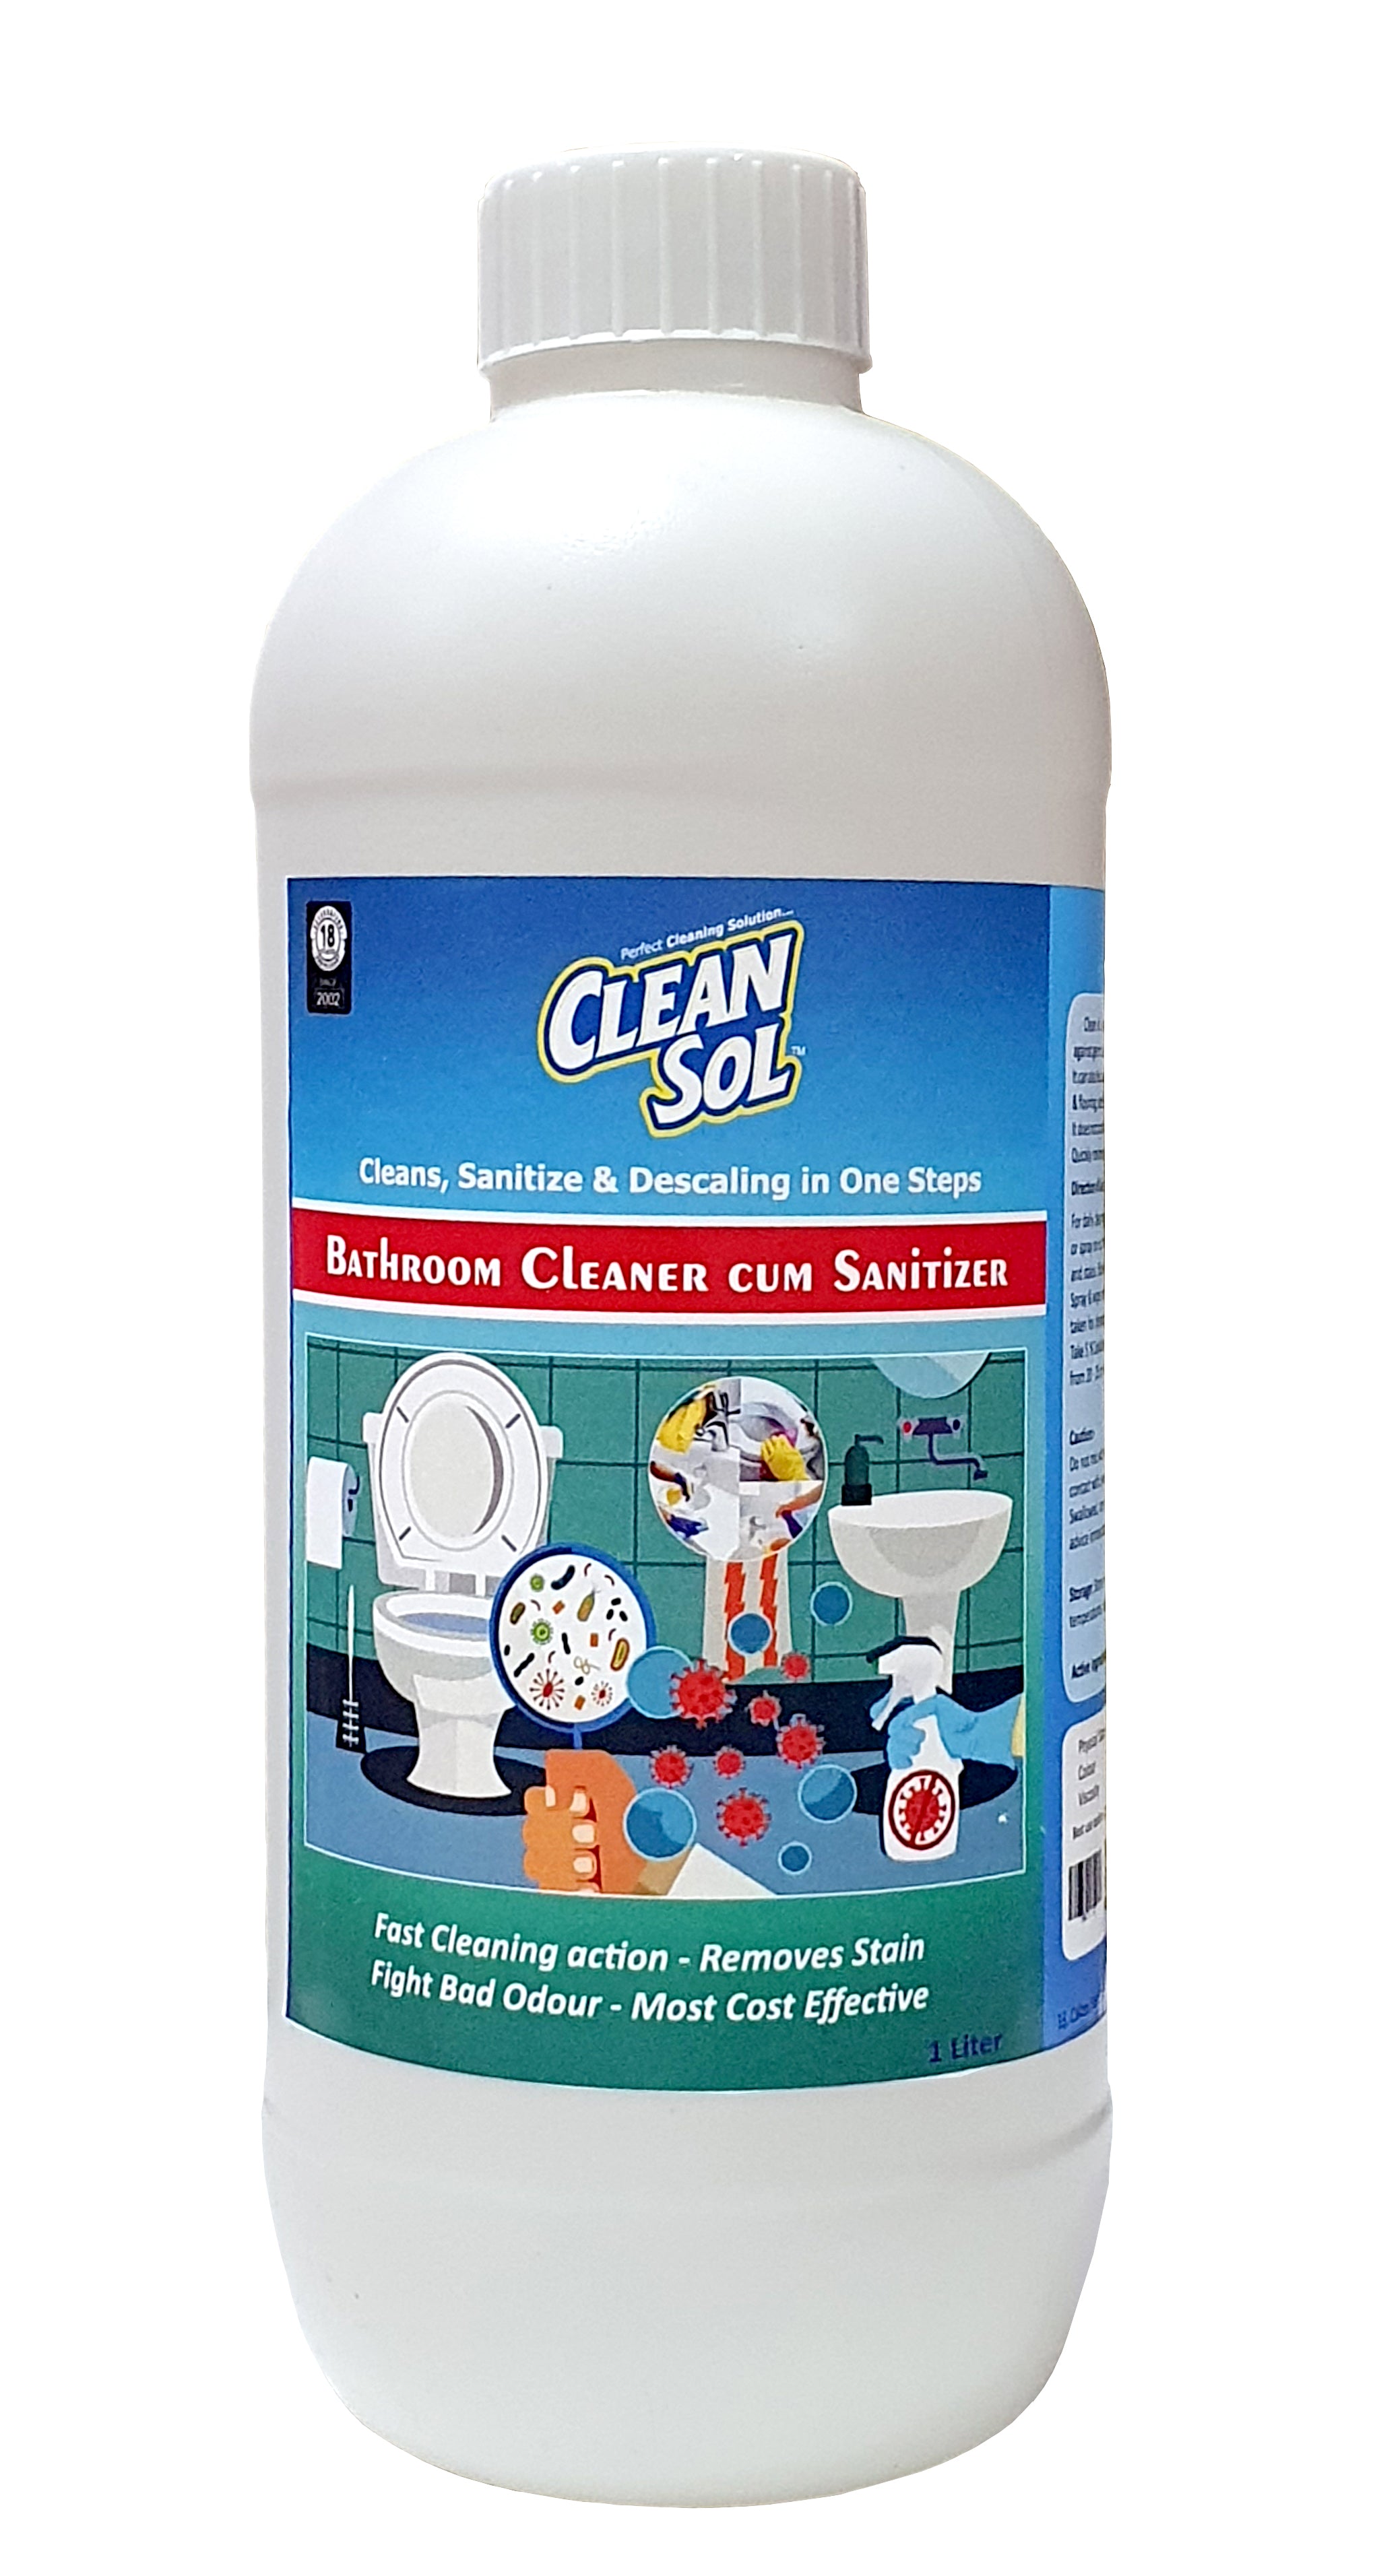 Cleansol Bathroom Cleaner & Sanitizer